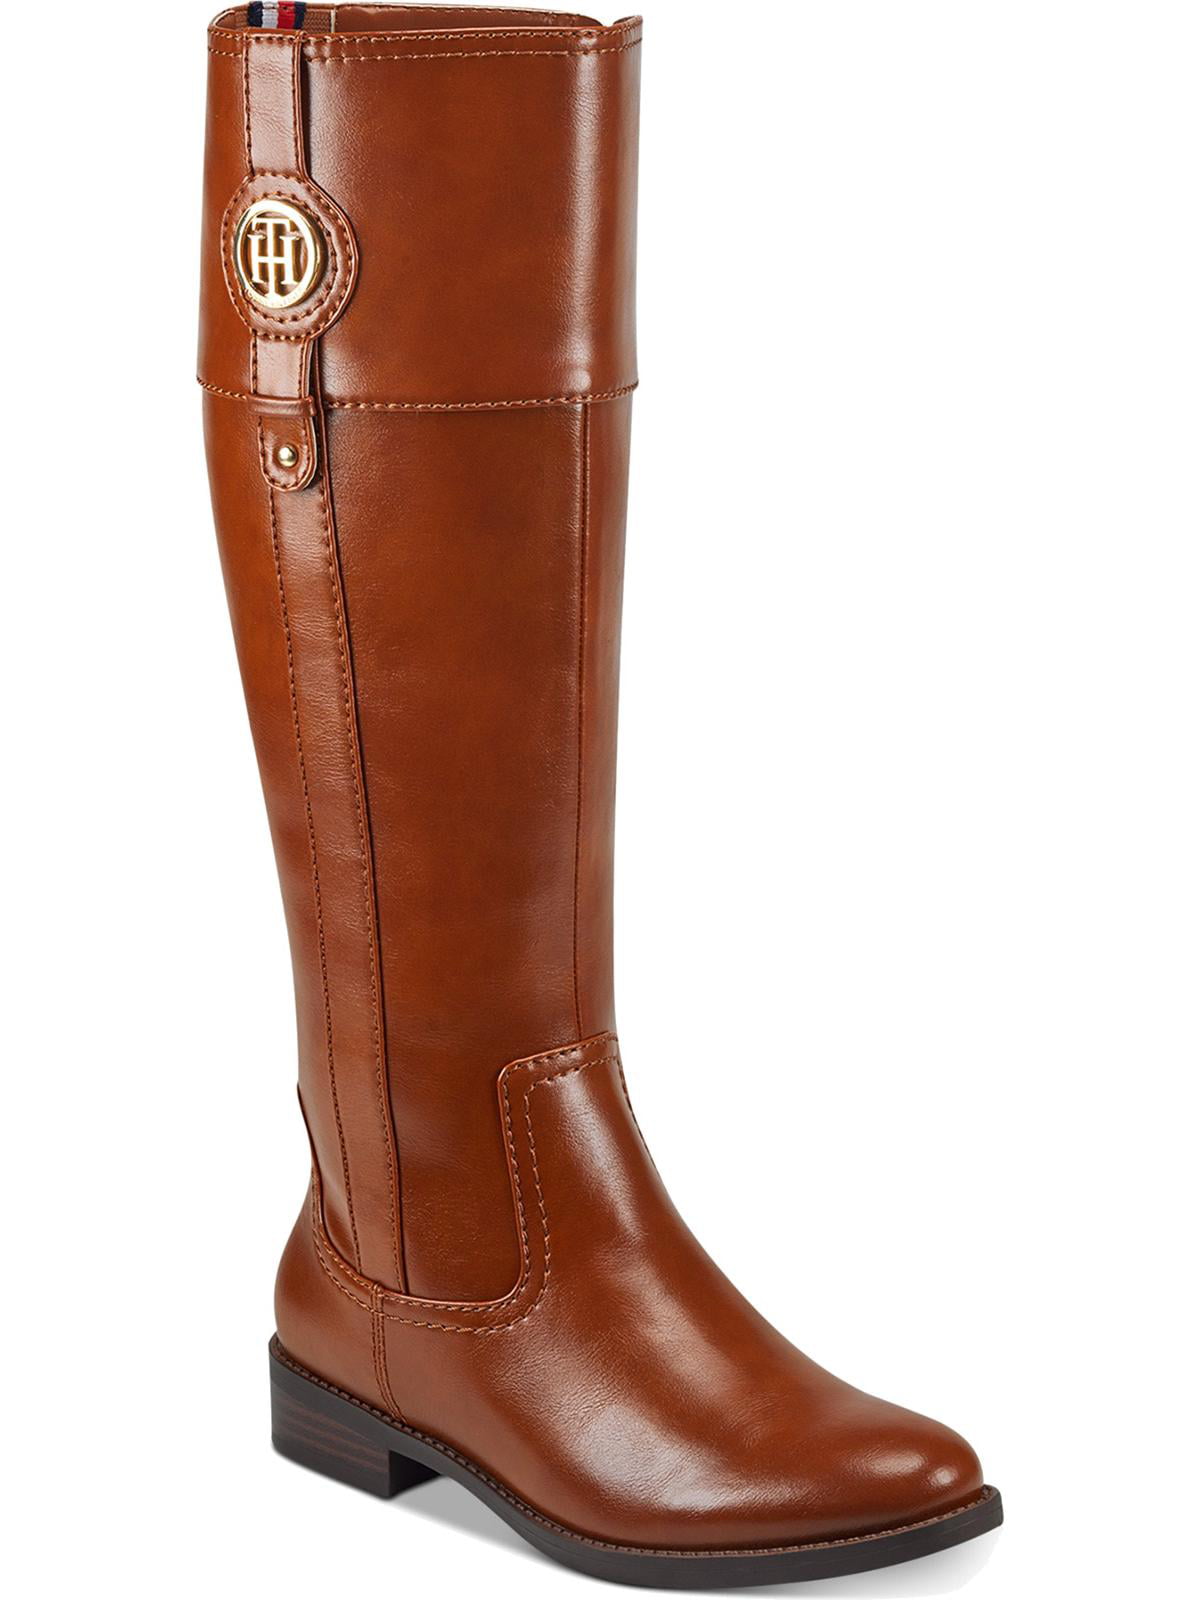 Tommy Hilfiger Womens Imina Faux Leather Riding Boots Brown 6.5 Medium